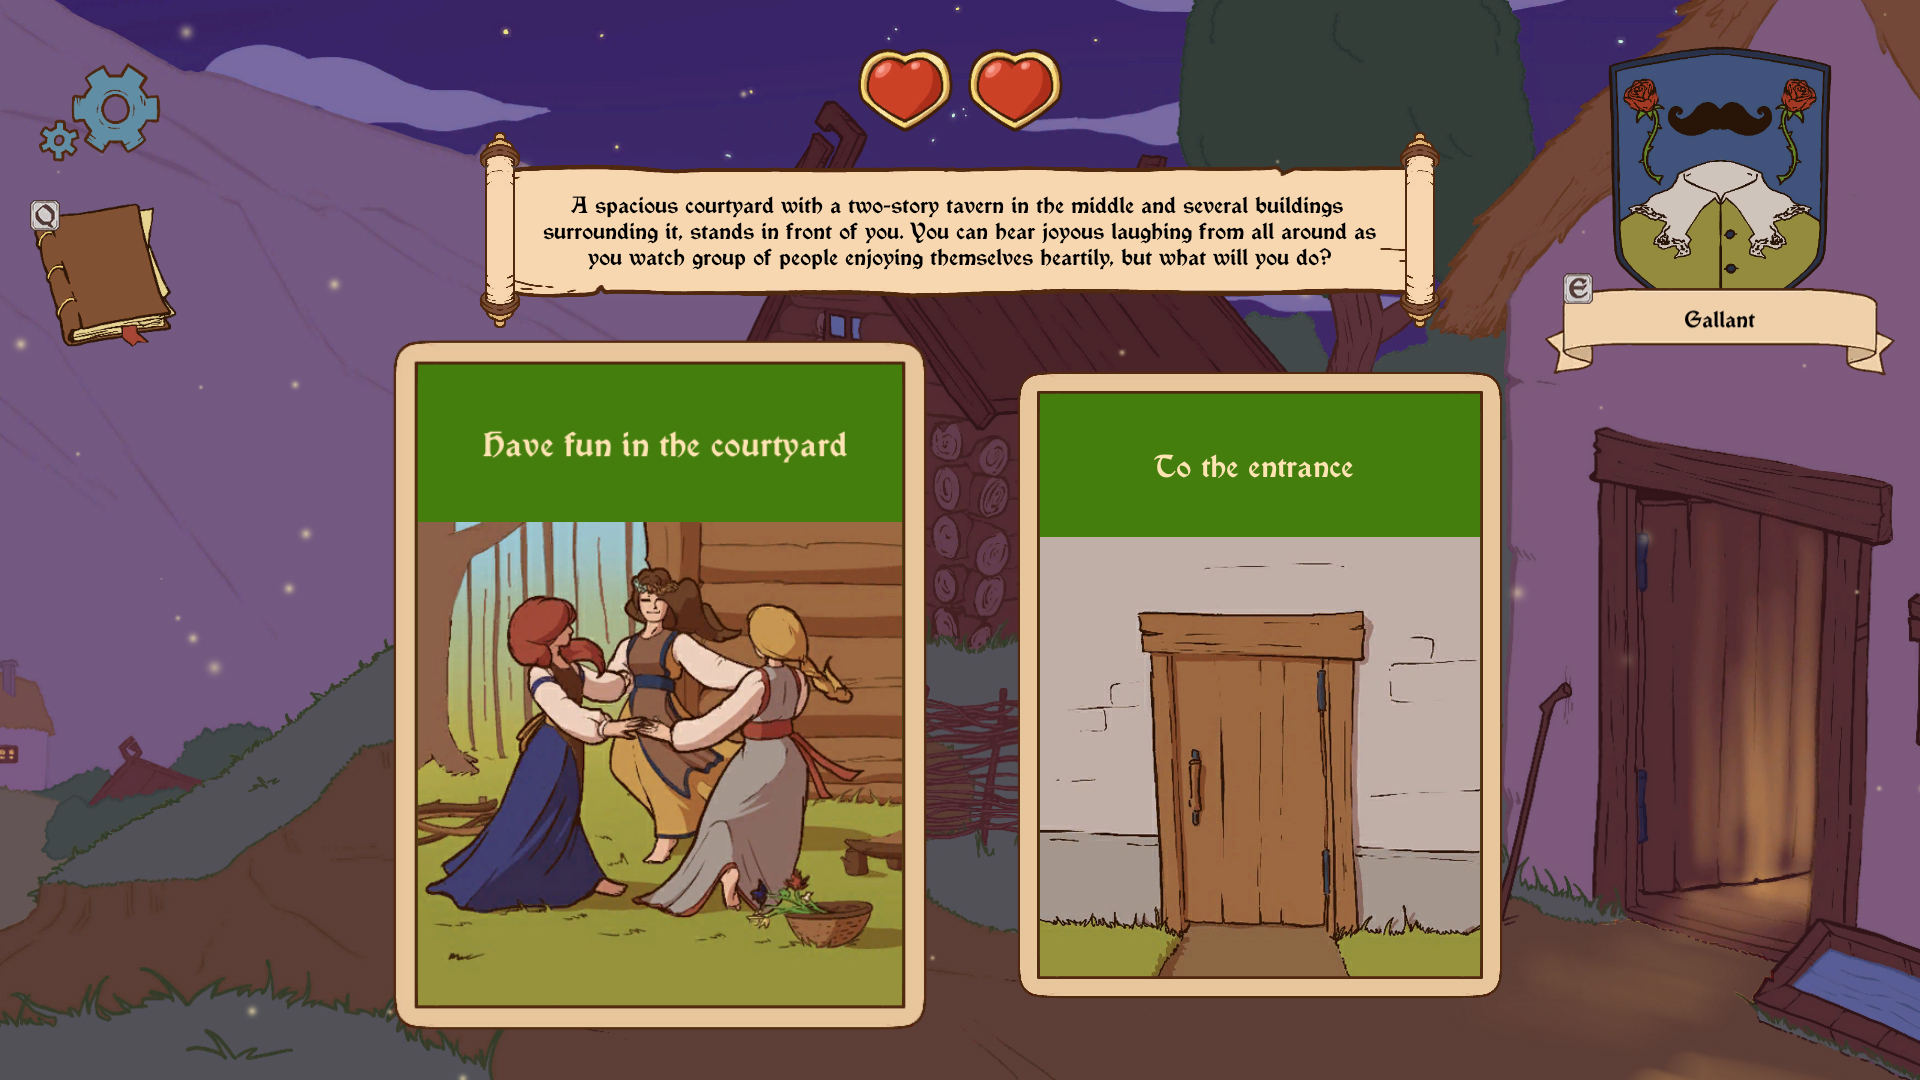 Descargar Choice of Life: Middle Ages 2 gratis para Android.